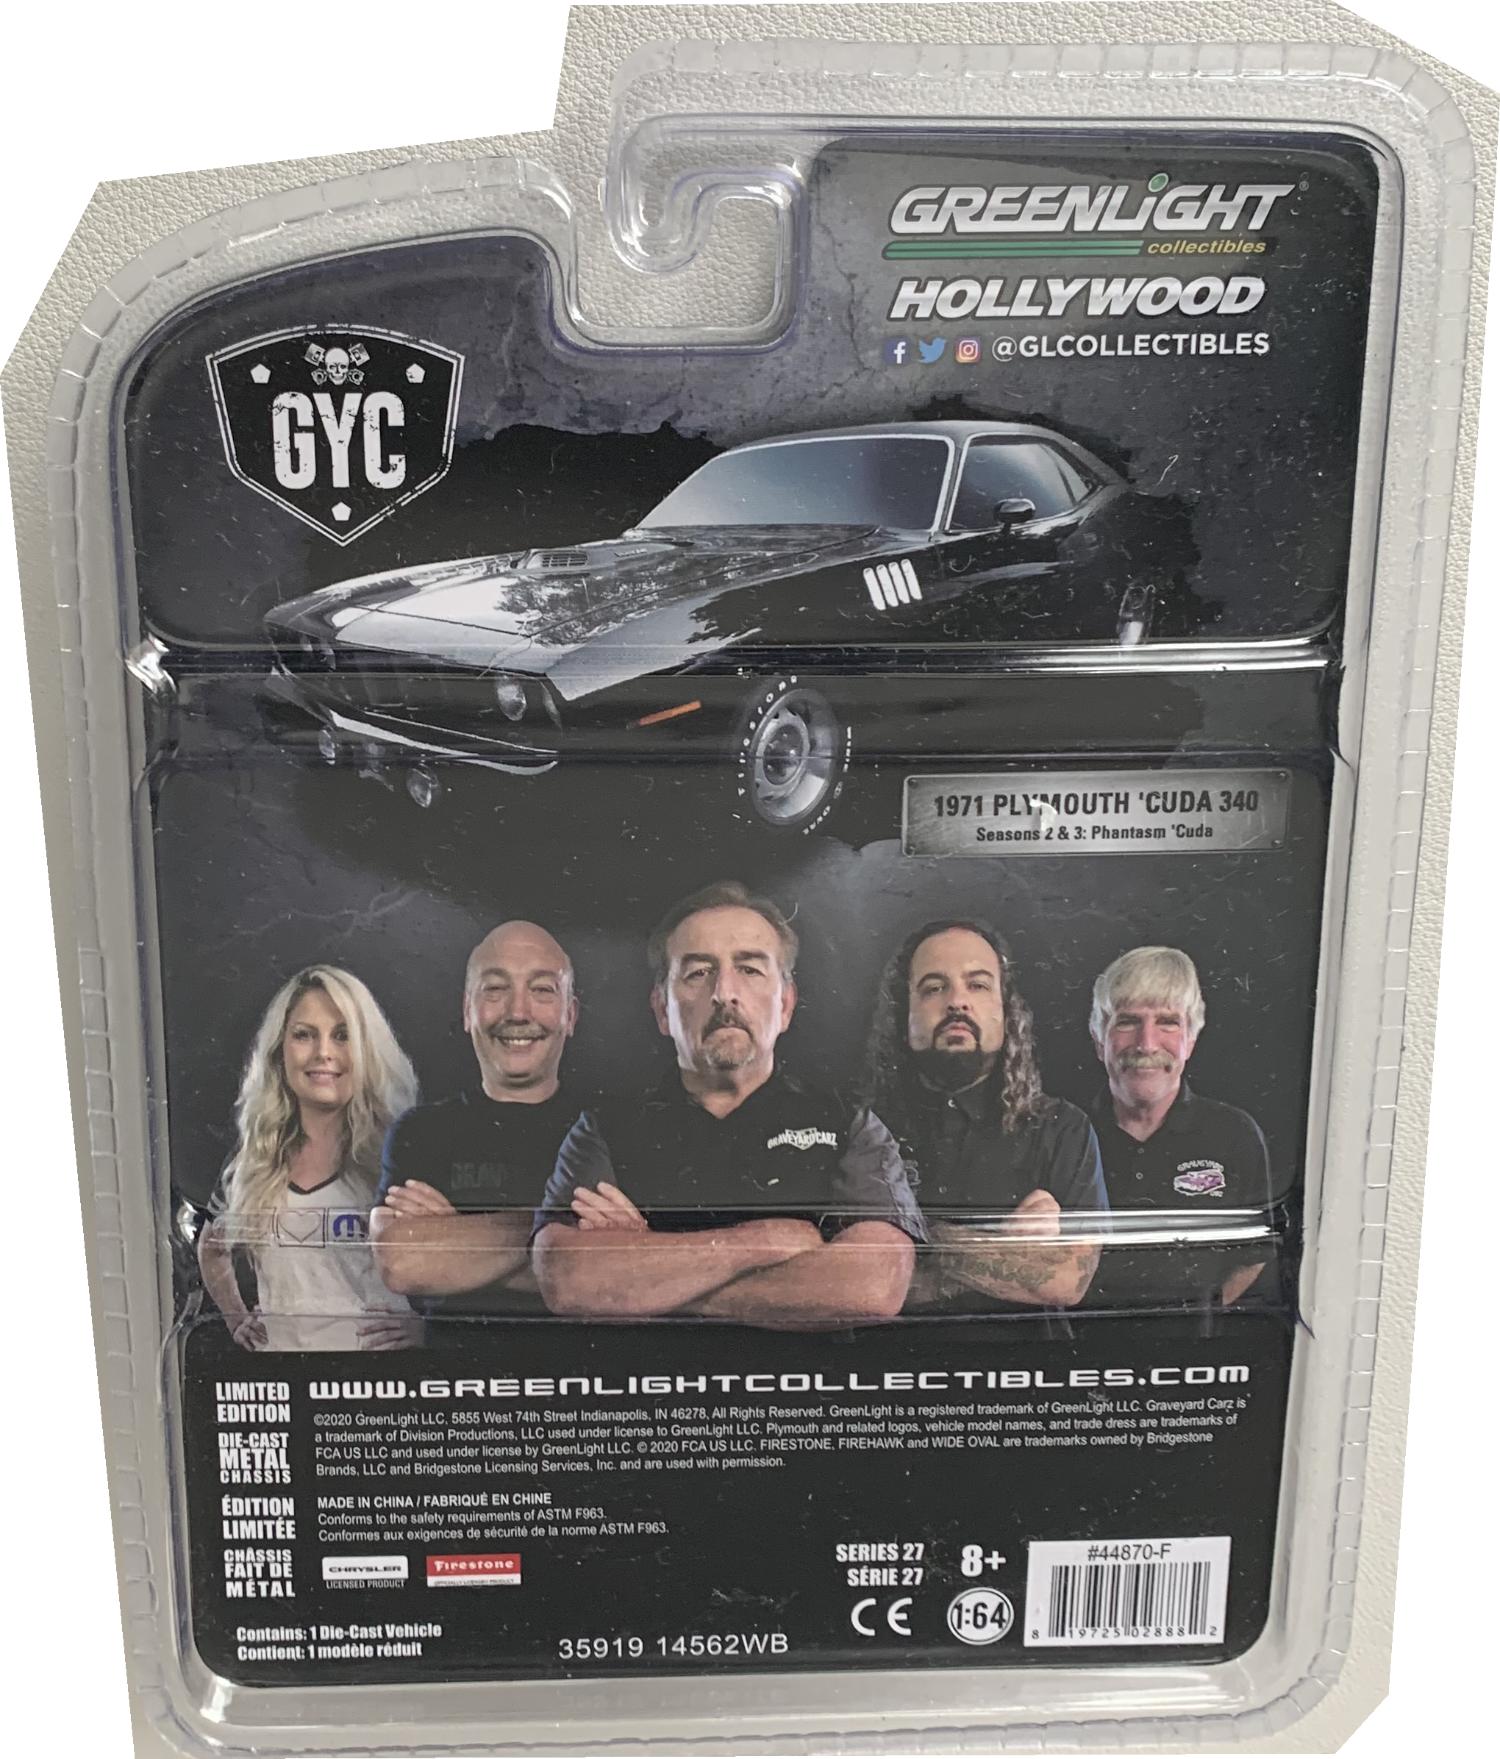 Graveyard Carz 1971 Plymouth Cuda 340 in black 1:64 scale model from Greenlight, limited edition